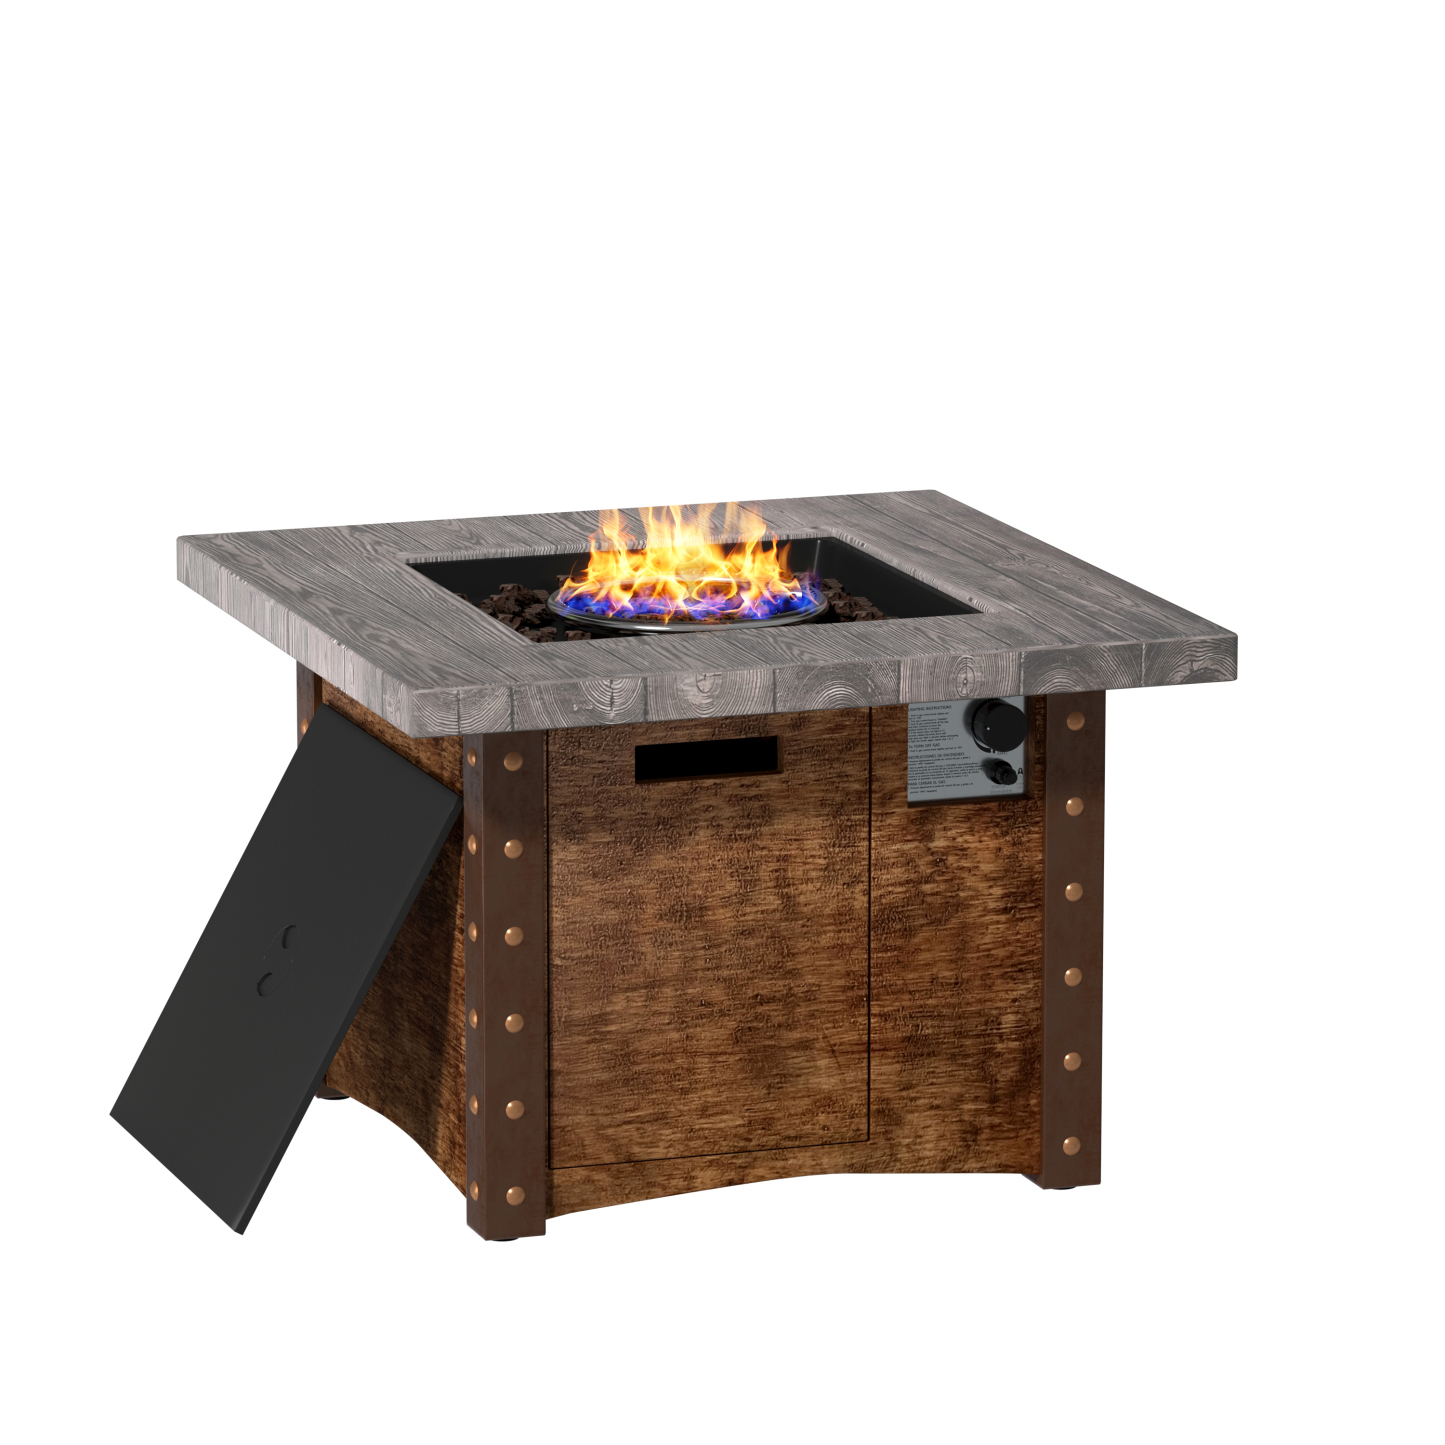 Mondawe 34.5 Inch Auto-Ignition Propane Fire Pit Table with Waterproof Cover-Mondawe